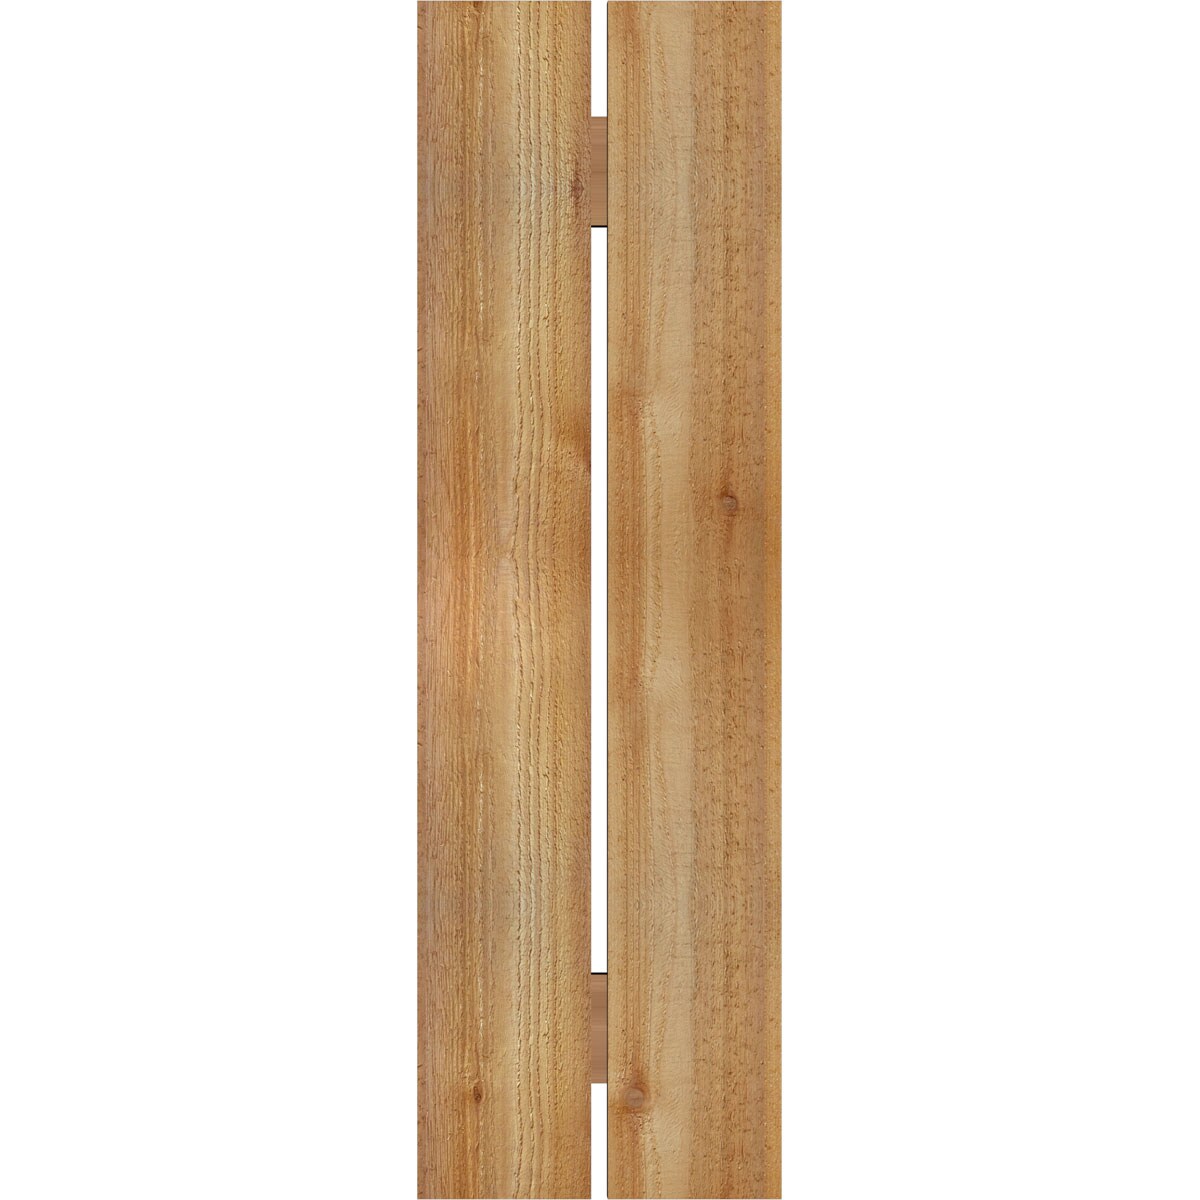 Ekena Millwork 2-Pack 11.25-in W x 37-in H Unfinished Board and Batten Spaced Wood Western Red cedar Exterior Shutters